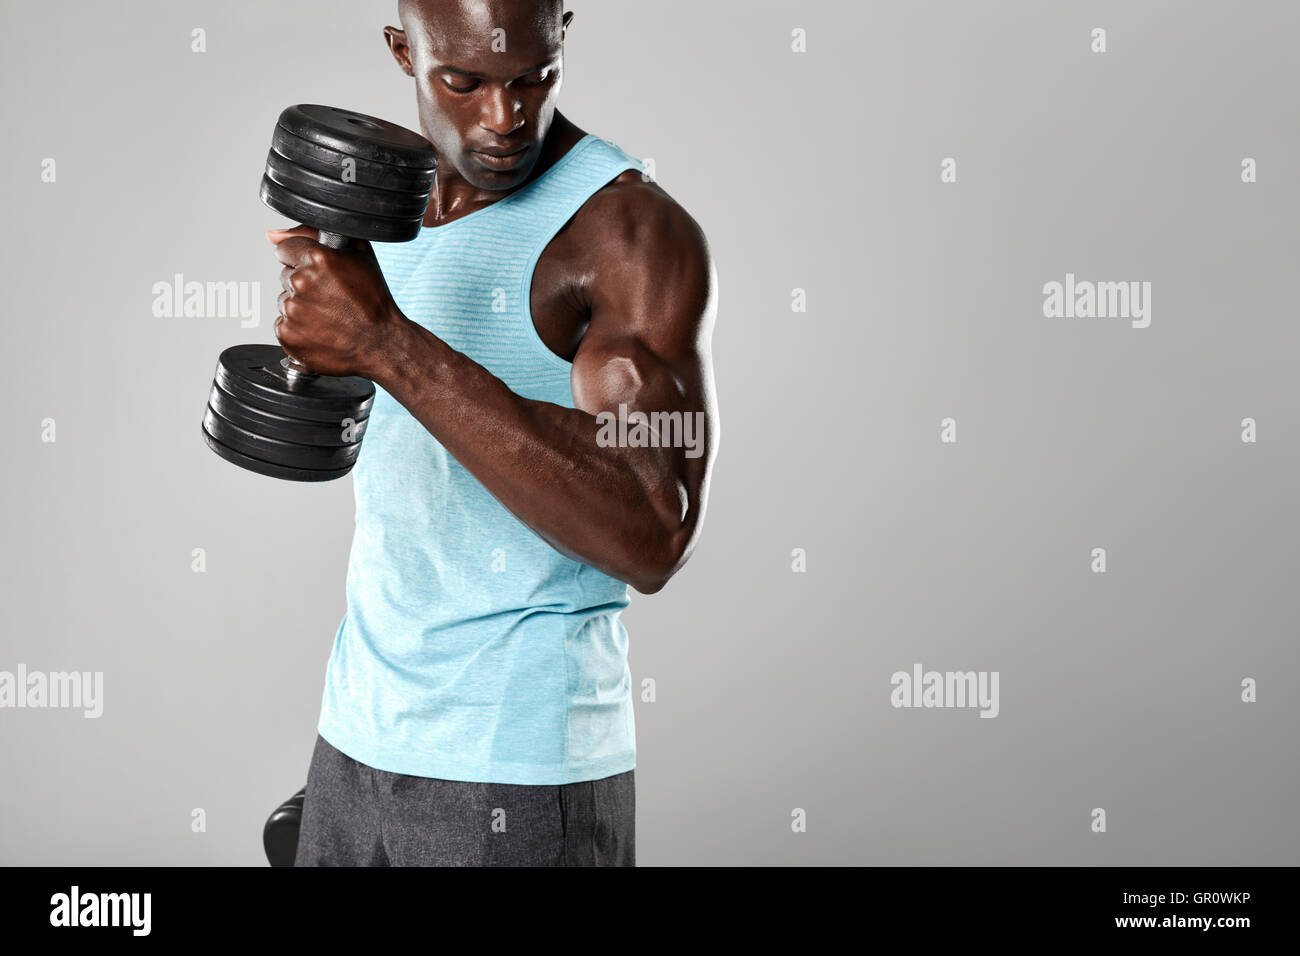 Shot of fit and young man working out with dumbbells on grey background. Muscular man doing weight exercise. Stock Photo